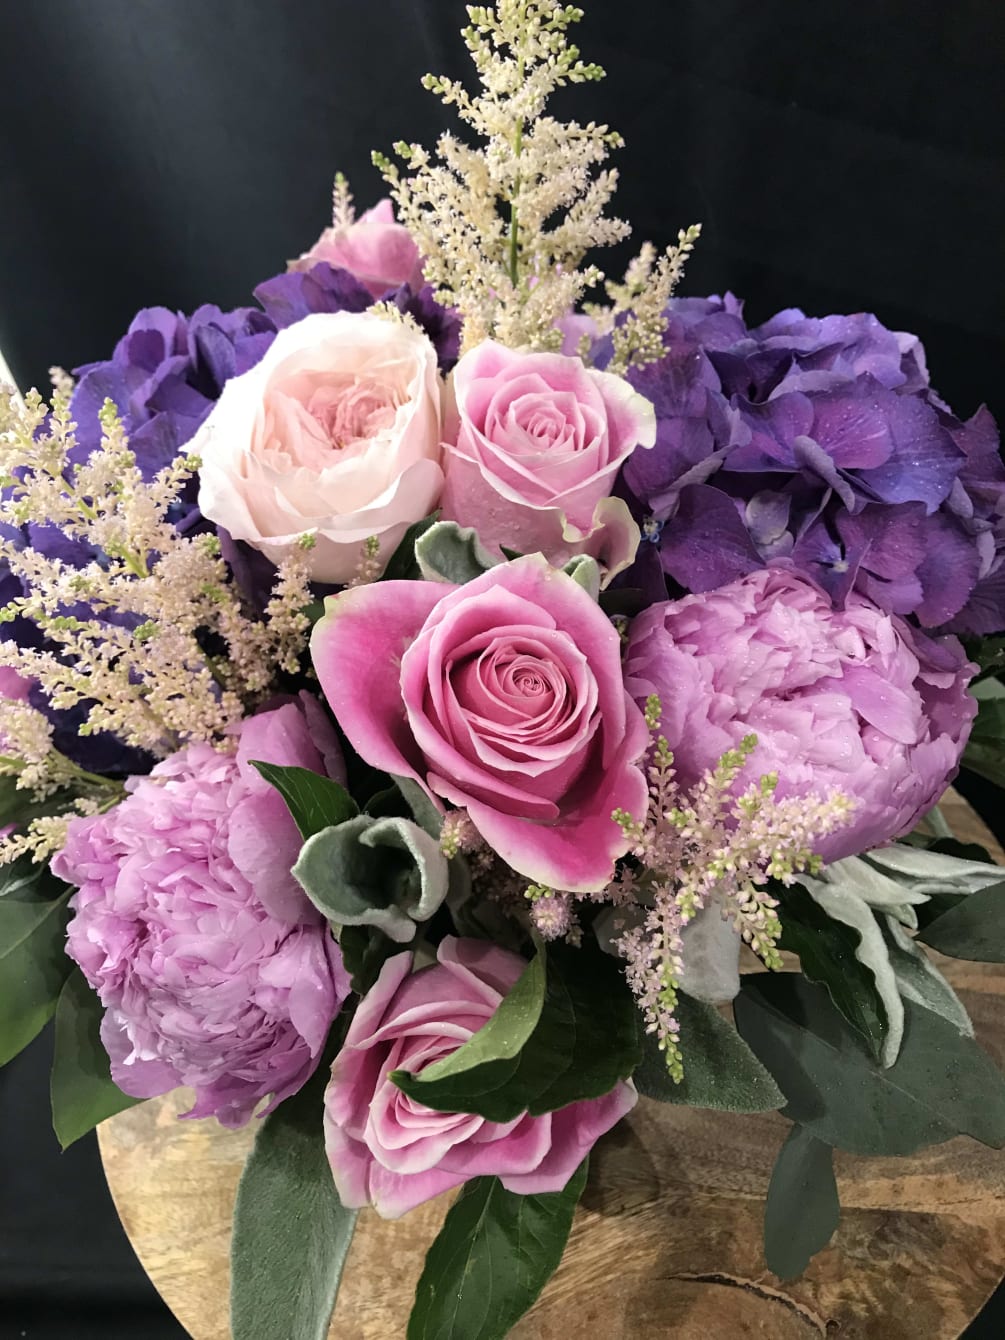 This arrangement takes the classic color combination of pink and purple and